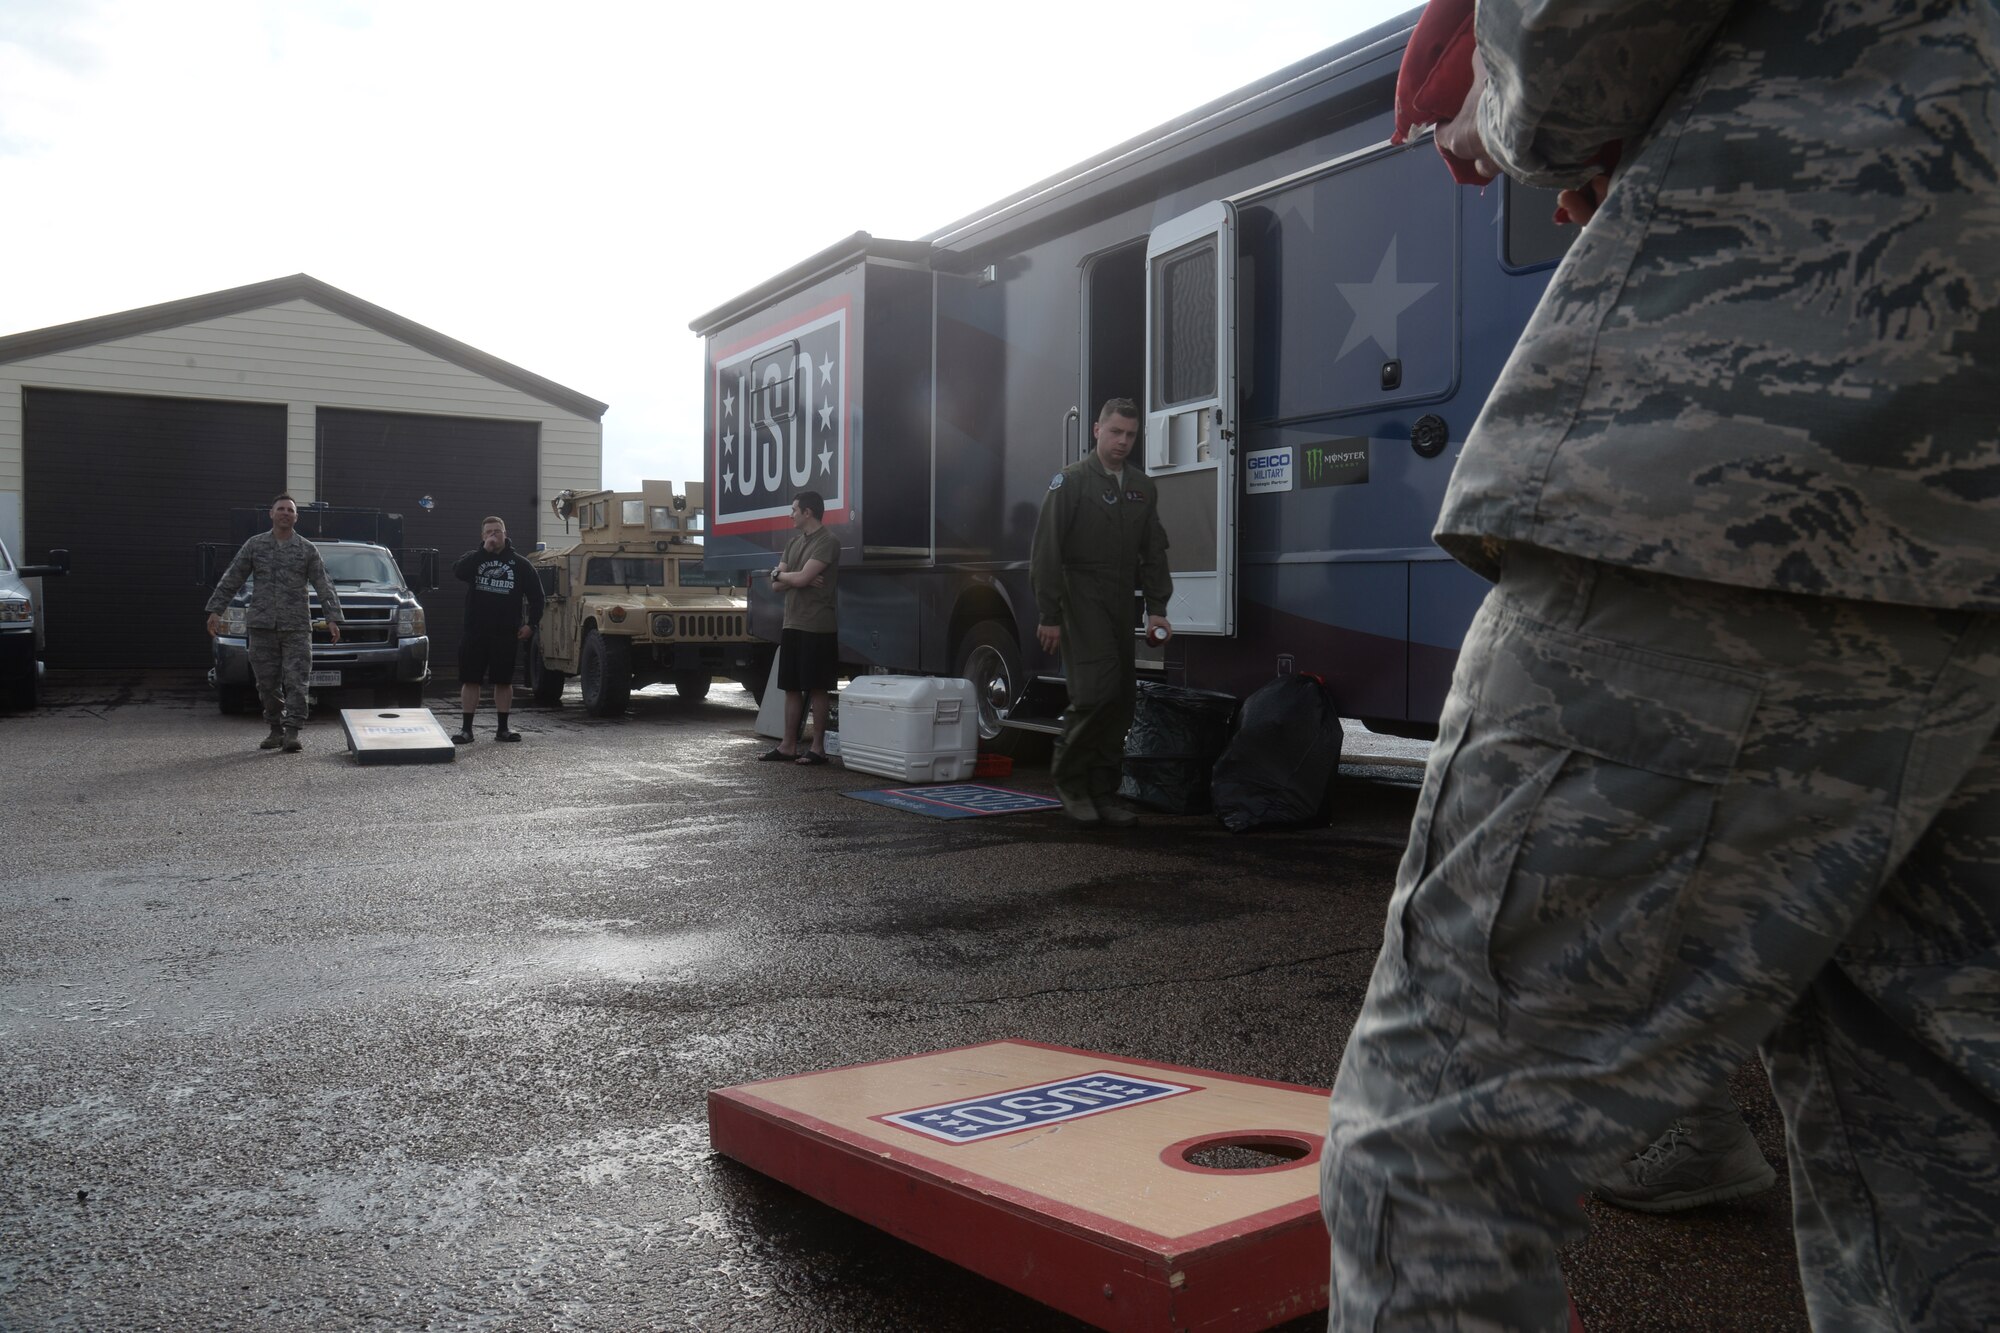 To boost morale, United Service Organization visited Airmen while they were deployed to the missile complex.